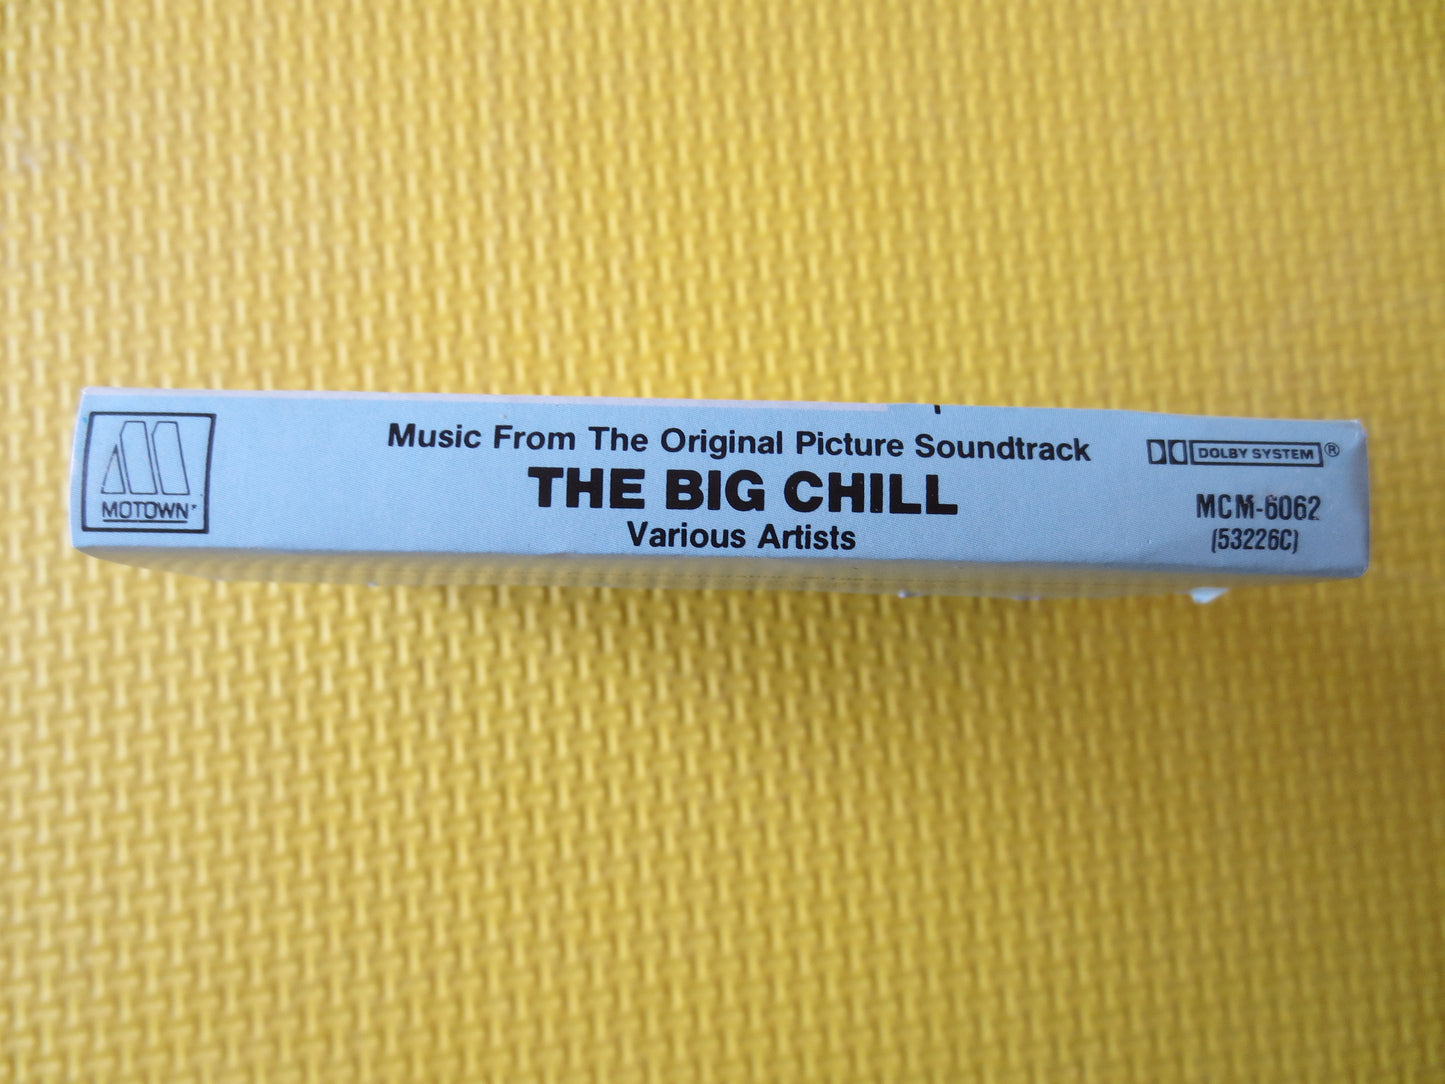 The BIG CHILL, SOUNDTRACK, Rock Music, Rock and Roll Tape, Rock Music Cassette, Music Cassettes, Abba Tapes, 1983 Cassette